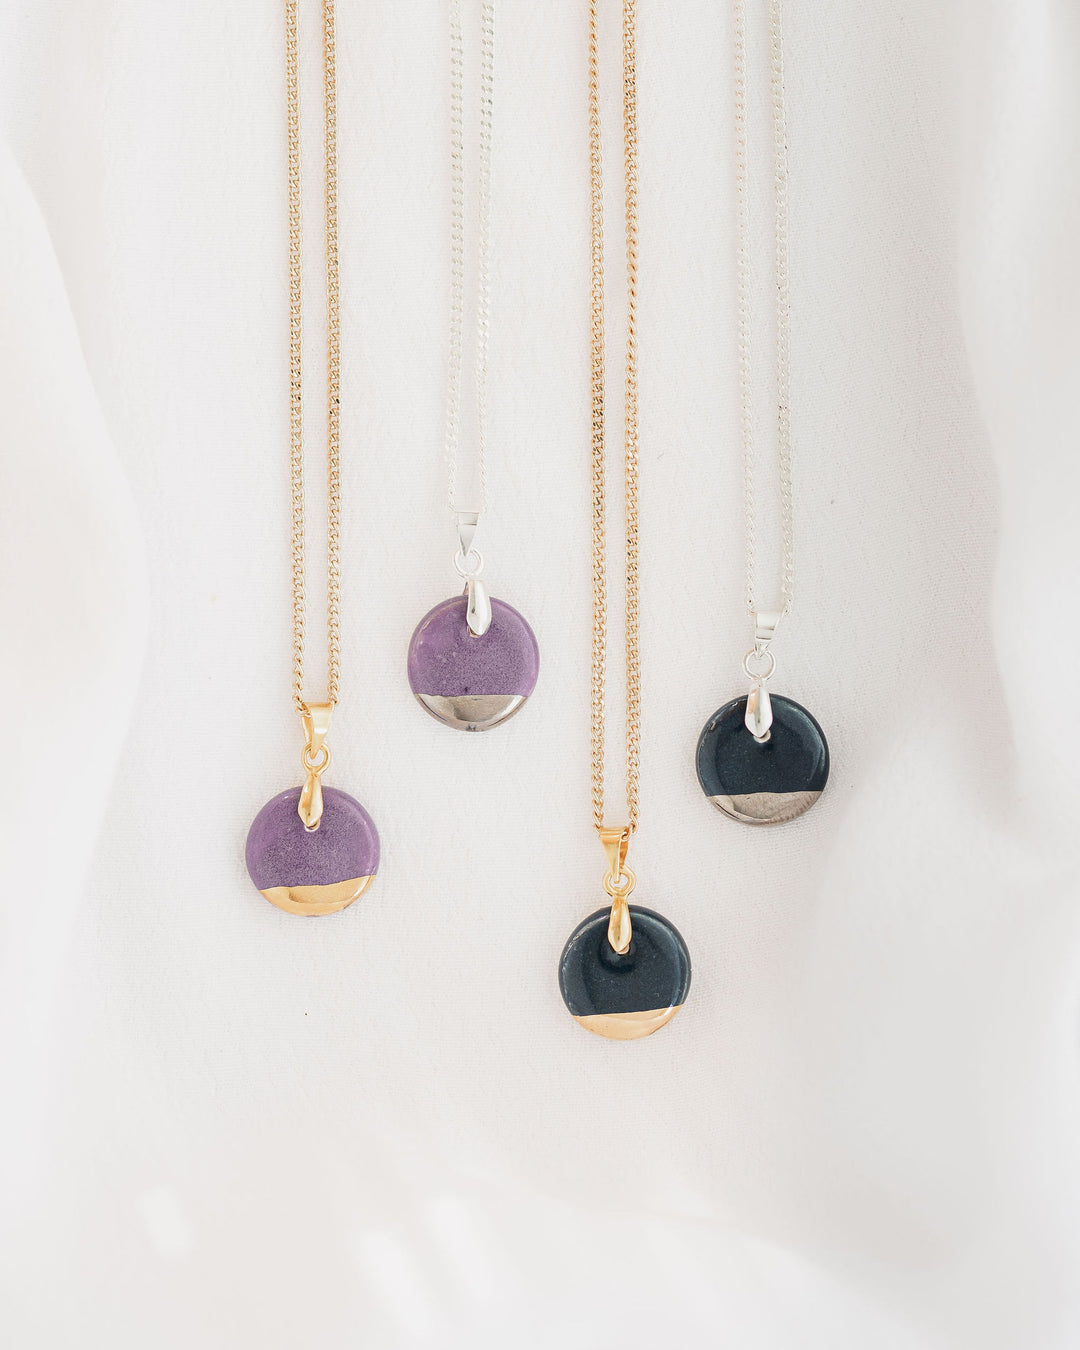 *New* Circle Shaped Ceramic pendant necklace and huggies gift set